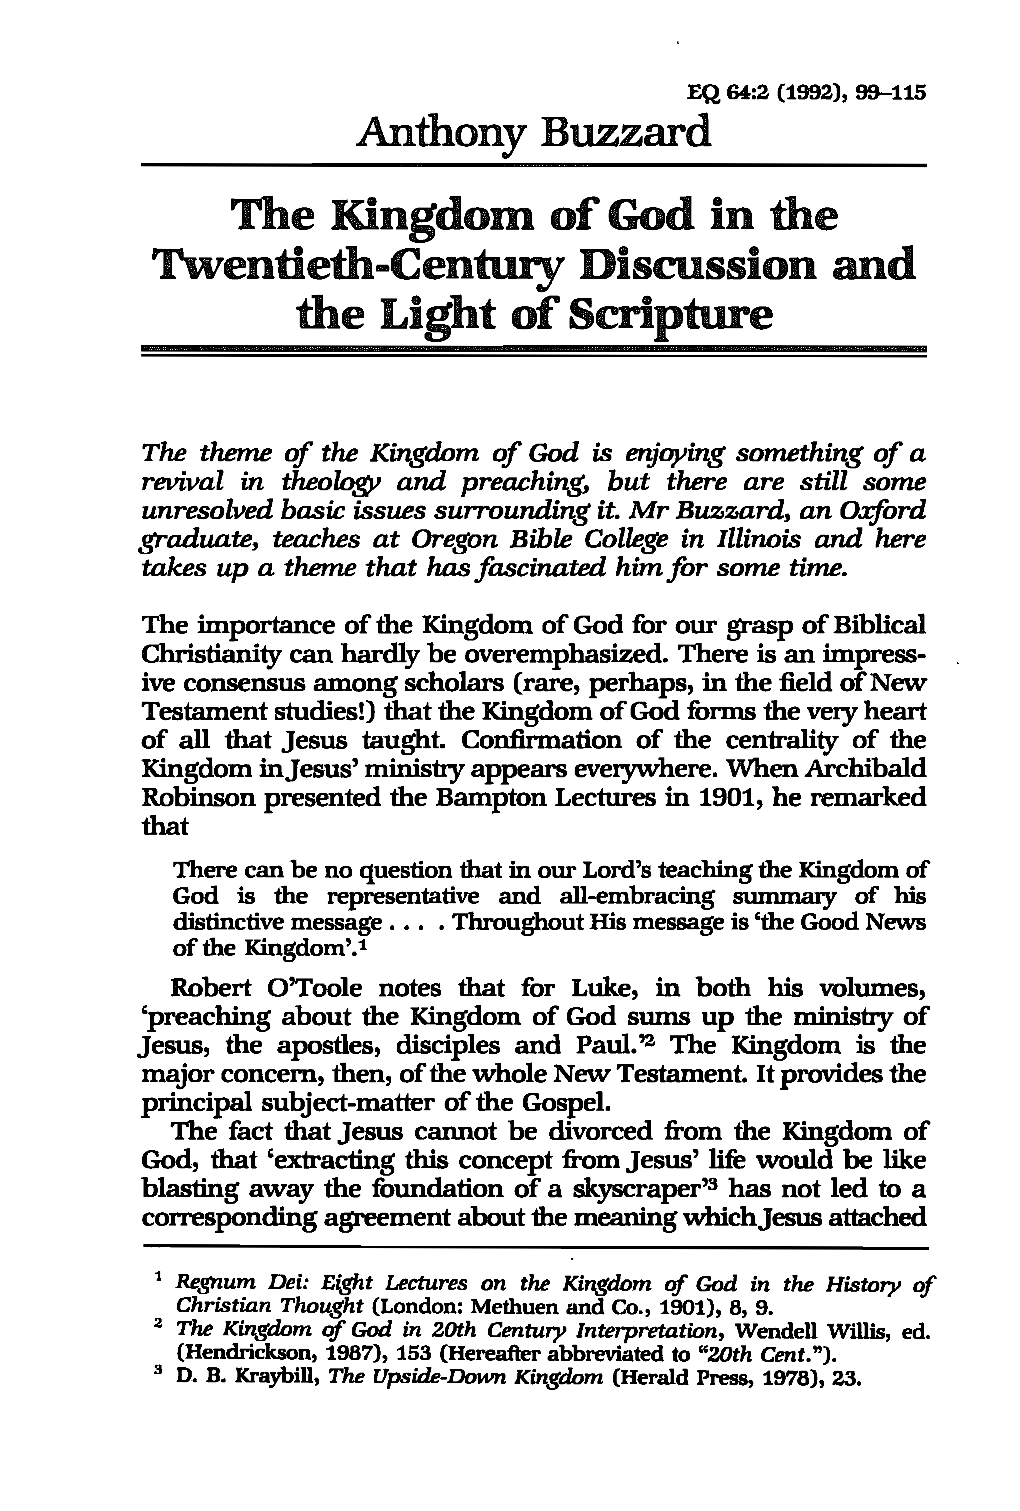 Anthony Buzzard the Kingdom of God in the Twentieth-Century Discussion and the Light of Scripture